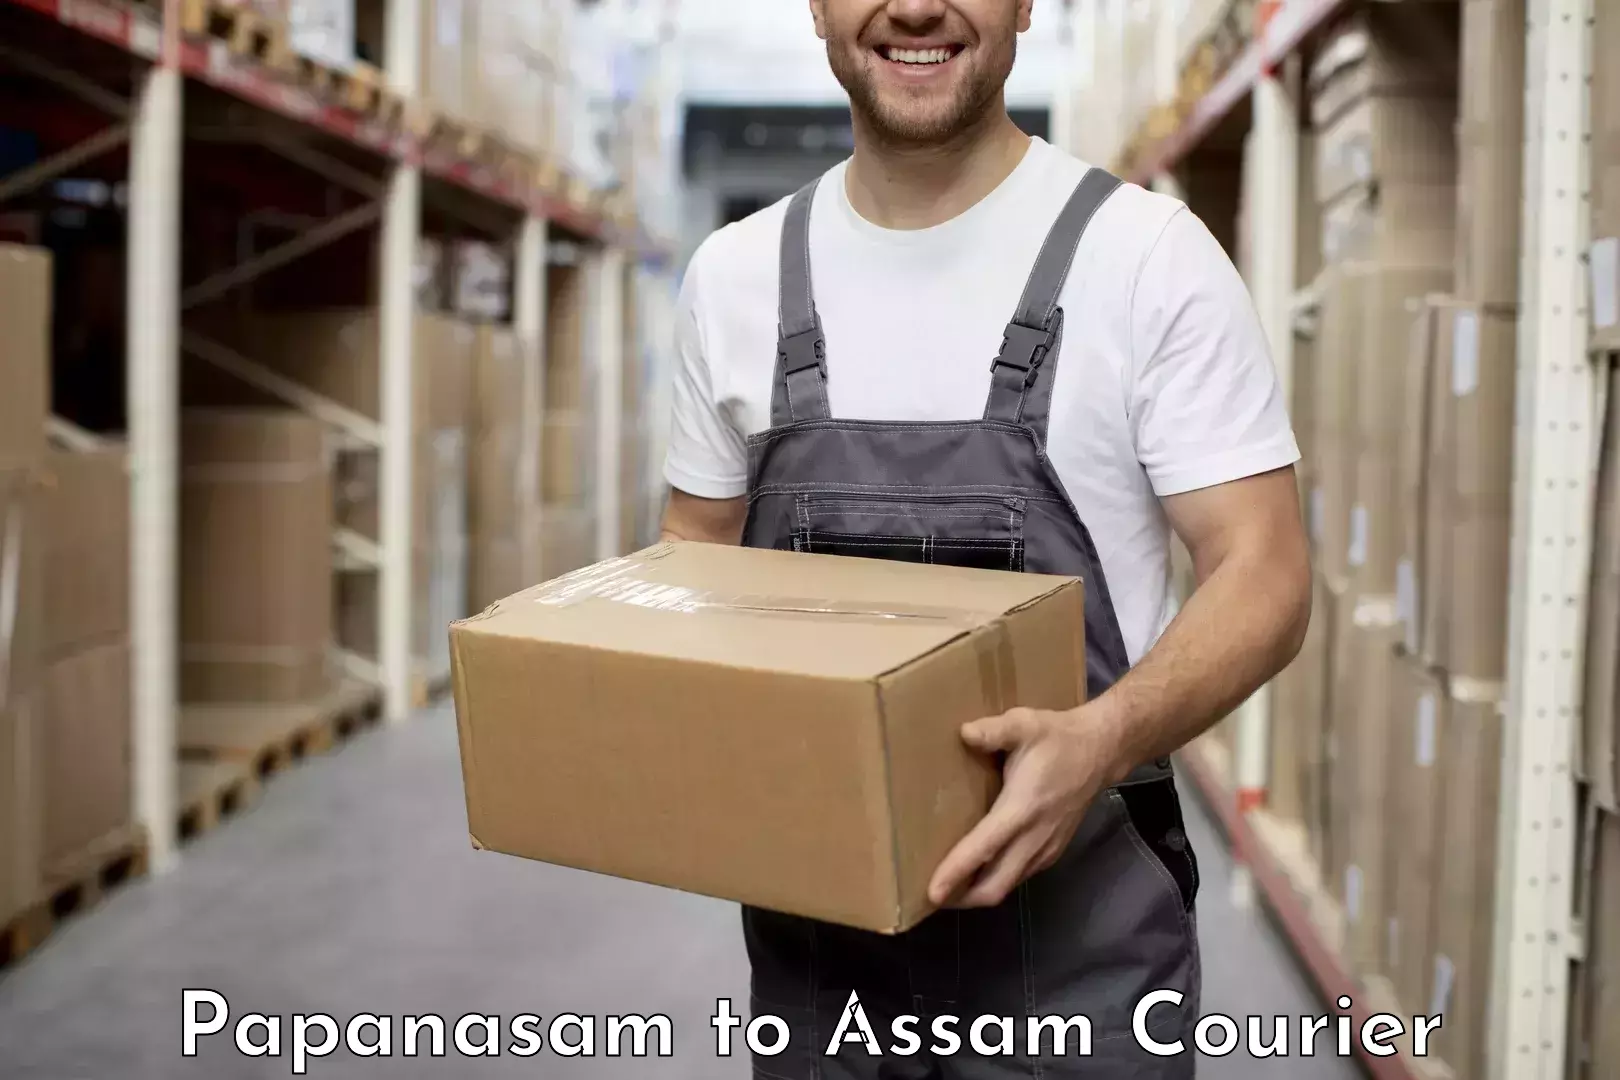 High-priority parcel service Papanasam to Lala Assam